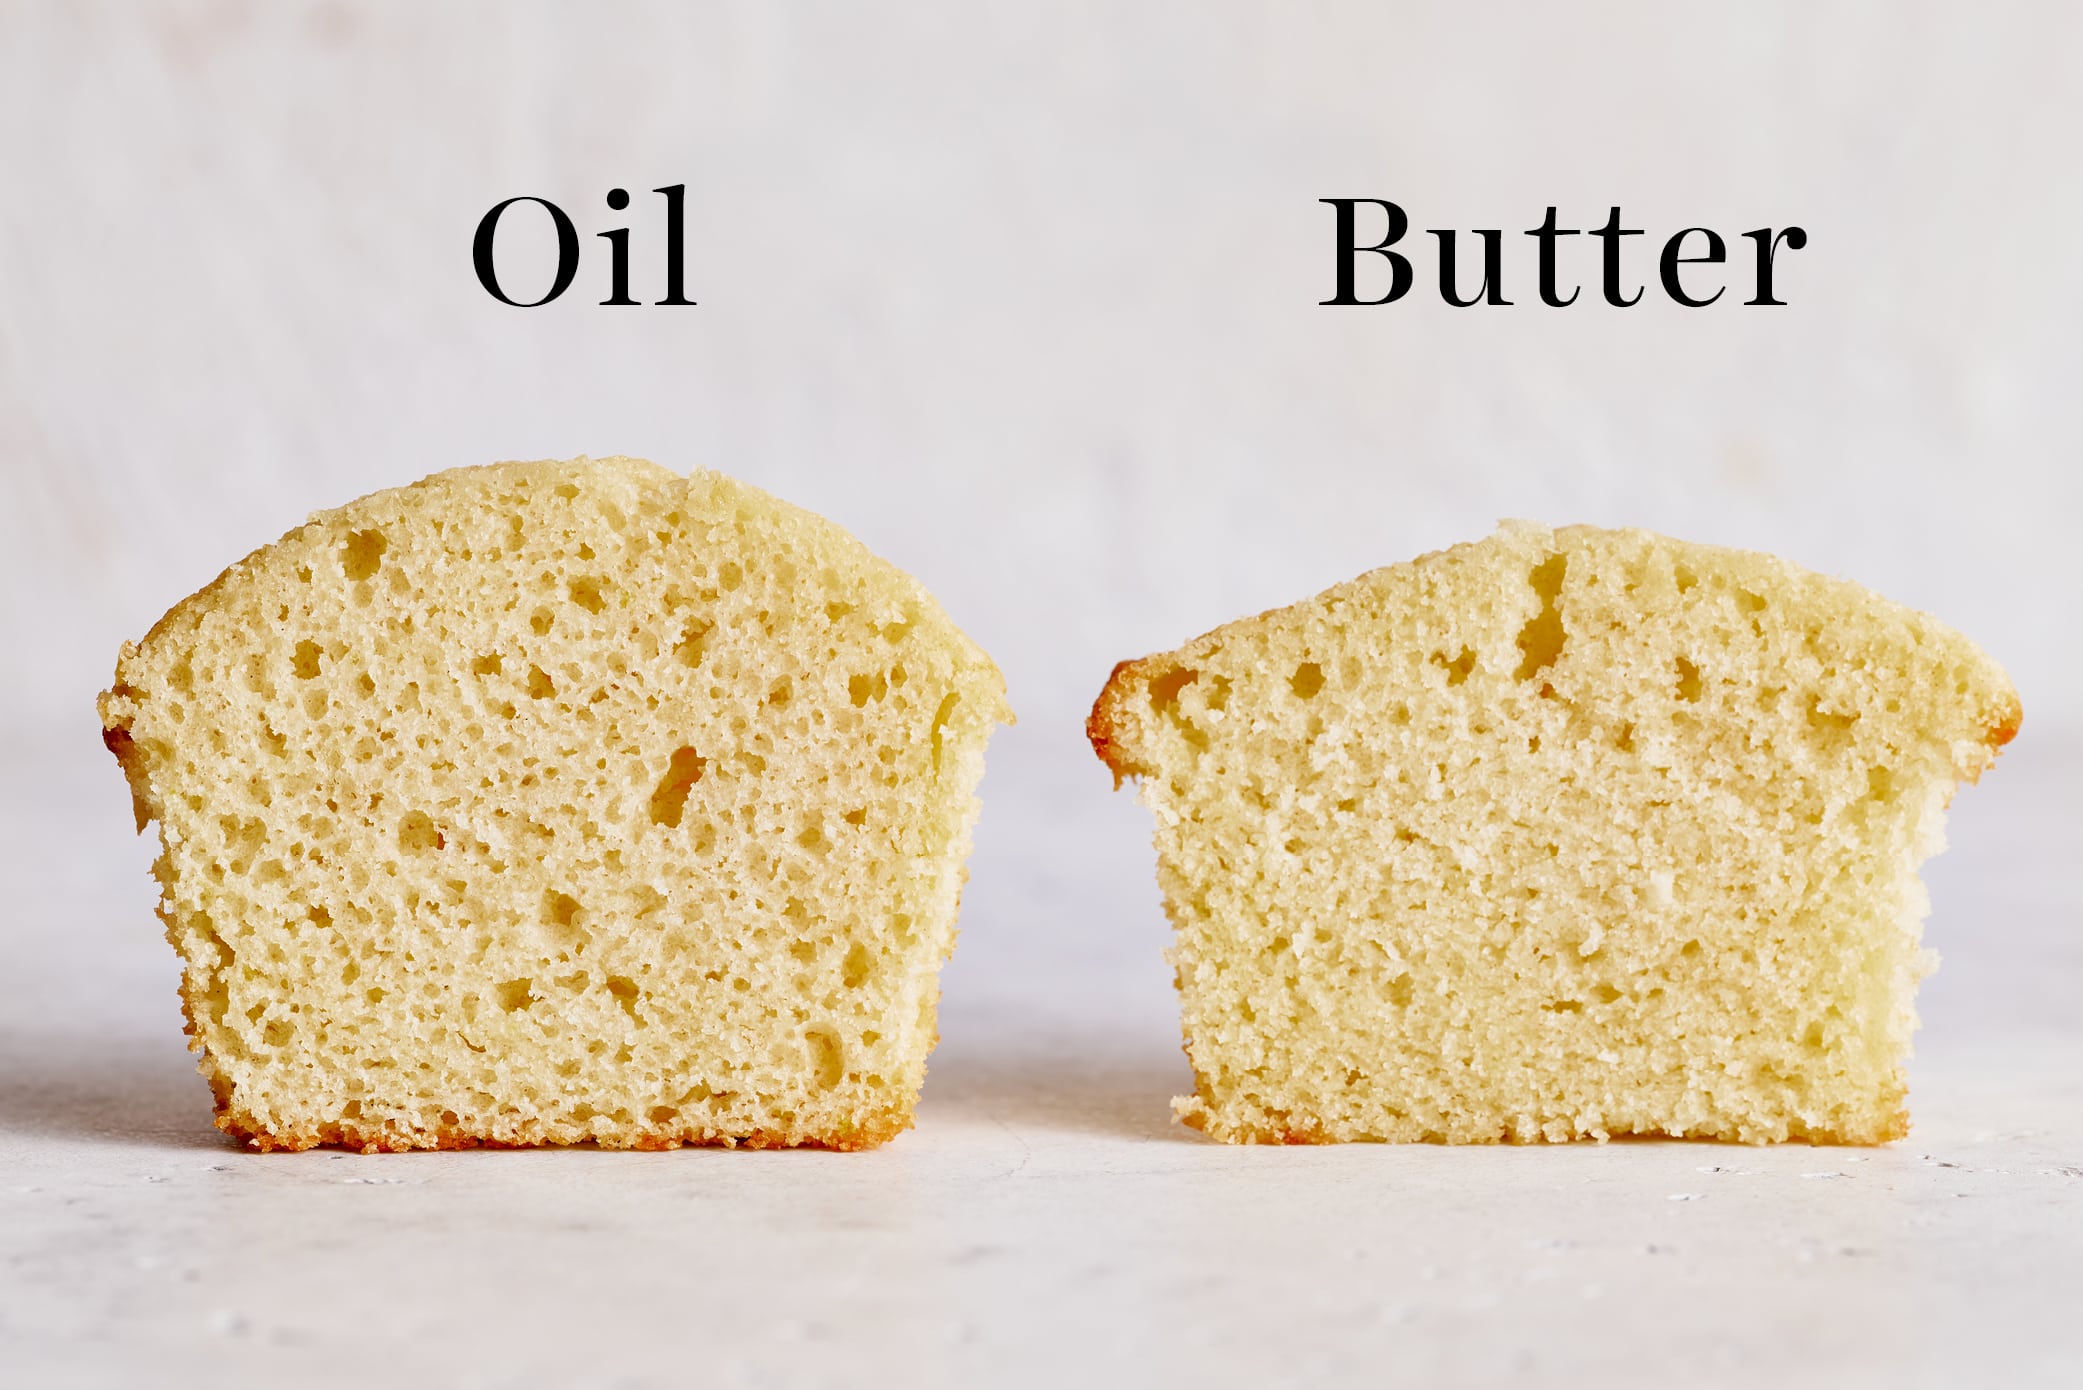 https://handletheheat.com/wp-content/uploads/2022/02/butter-vs-oil-in-cupcake-recipes.jpg